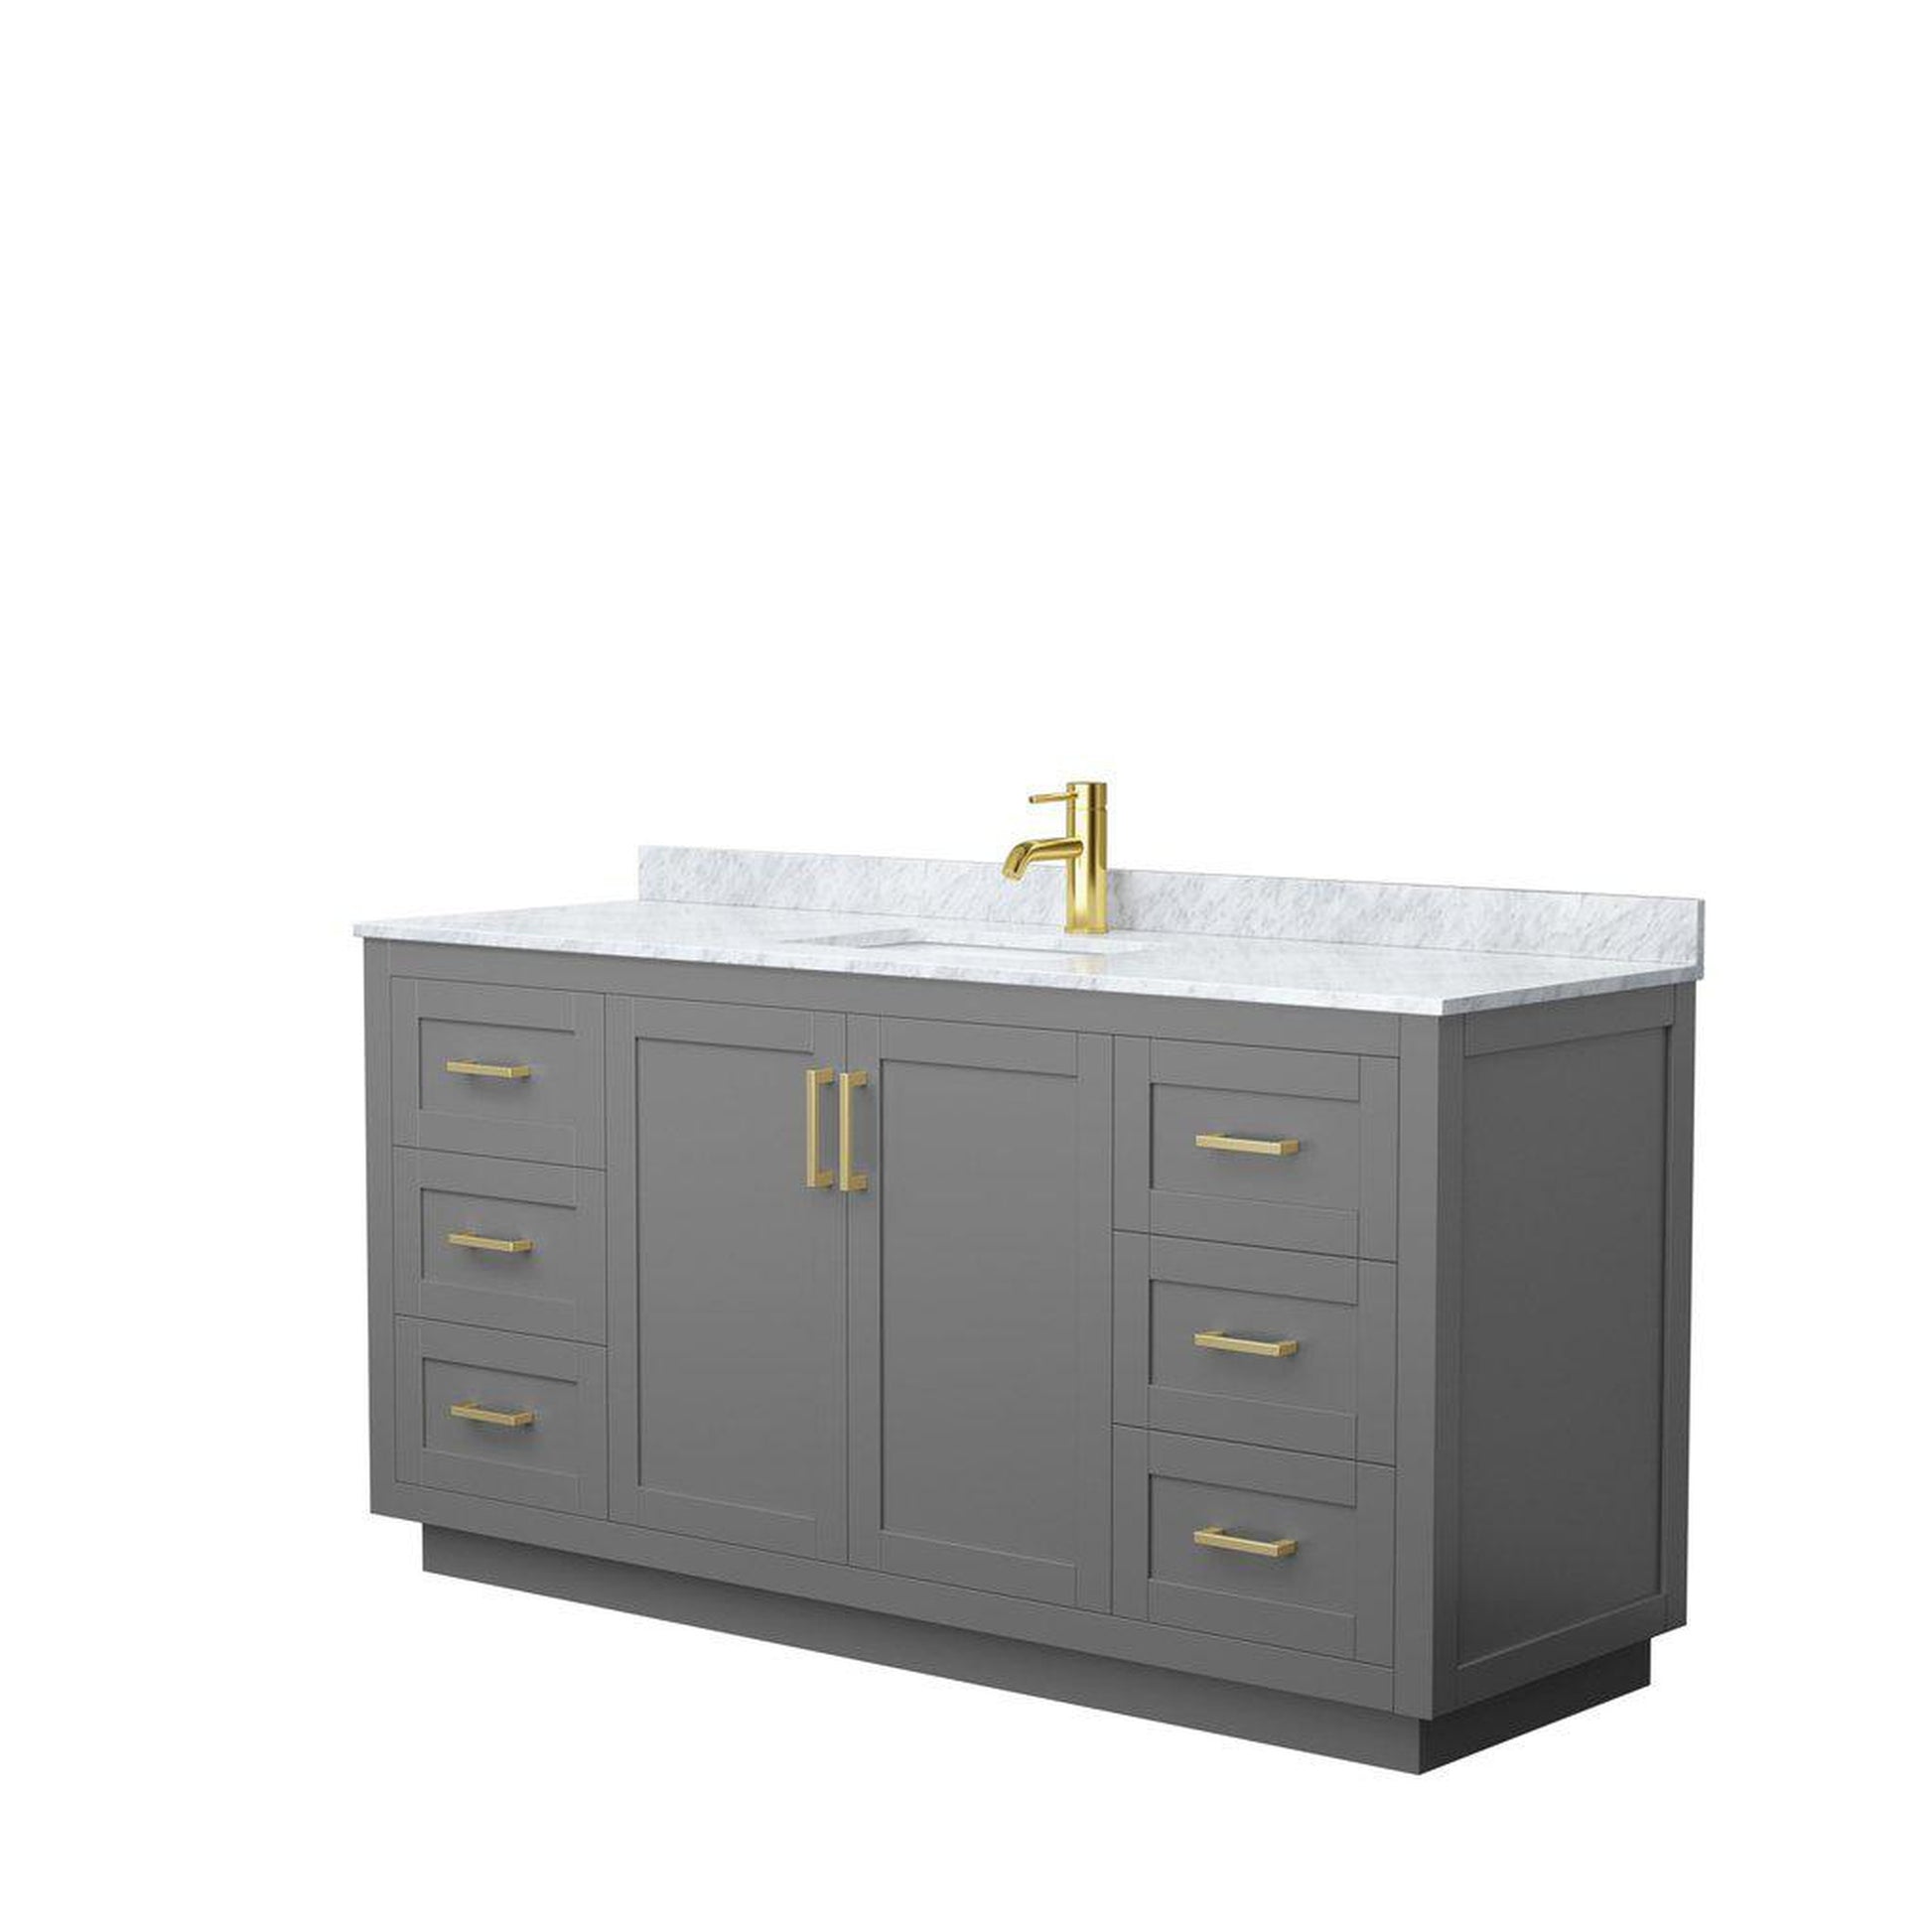 Wyndham Collection Miranda 66" Single Bathroom Dark Gray Vanity Set With White Carrara Marble Countertop, Undermount Square Sink, And Brushed Gold Trim